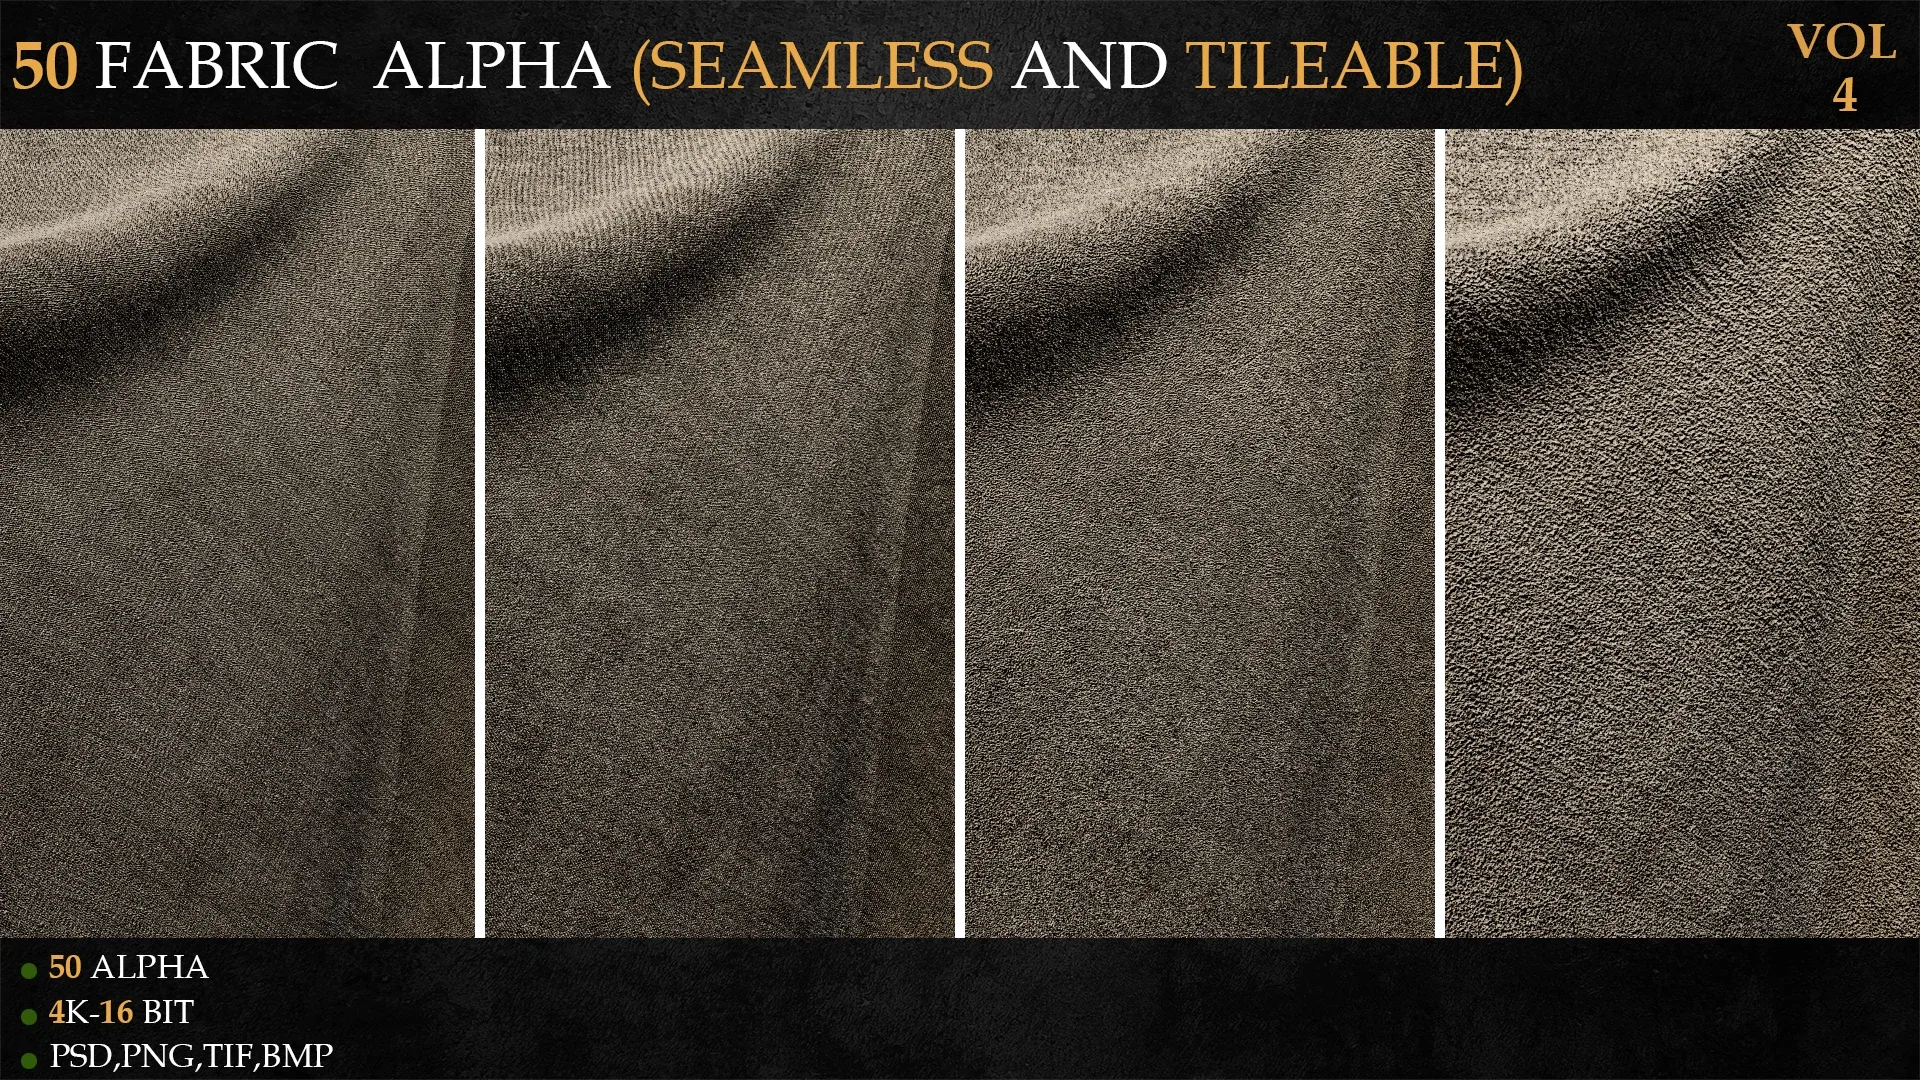 50 FABRIC ALPHA (SEAMLESS AND TILEABLE)-VOL 4